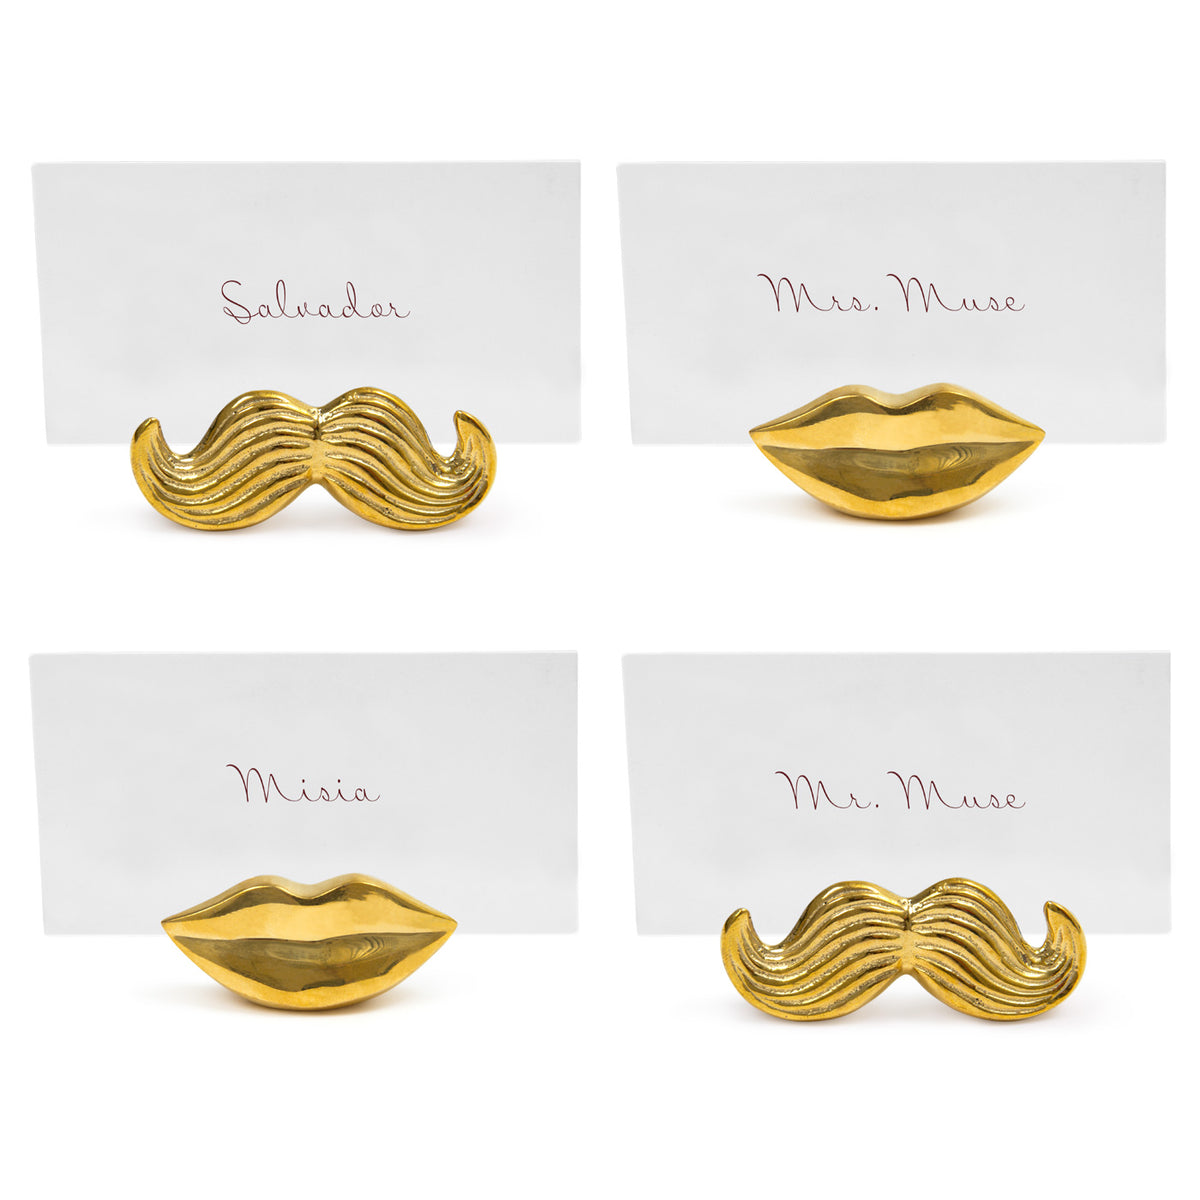 Mr. & Mrs. Muse Placecard Holders by Jonathan Adler